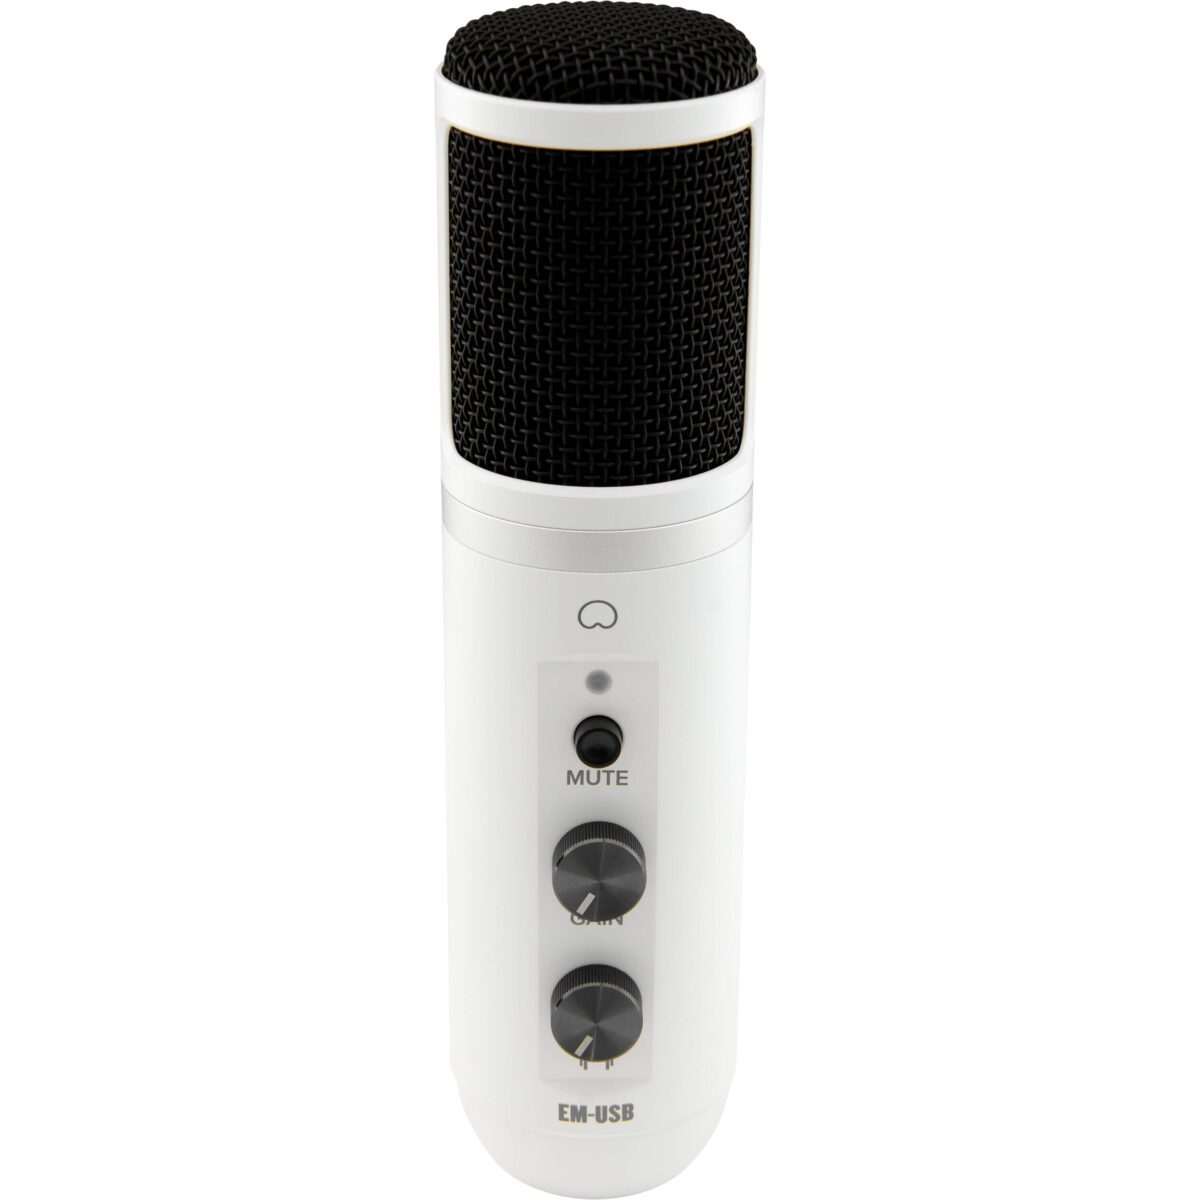 Mackie EM-USB EleMent Series USB Condenser Microphone (Limited Edition White)